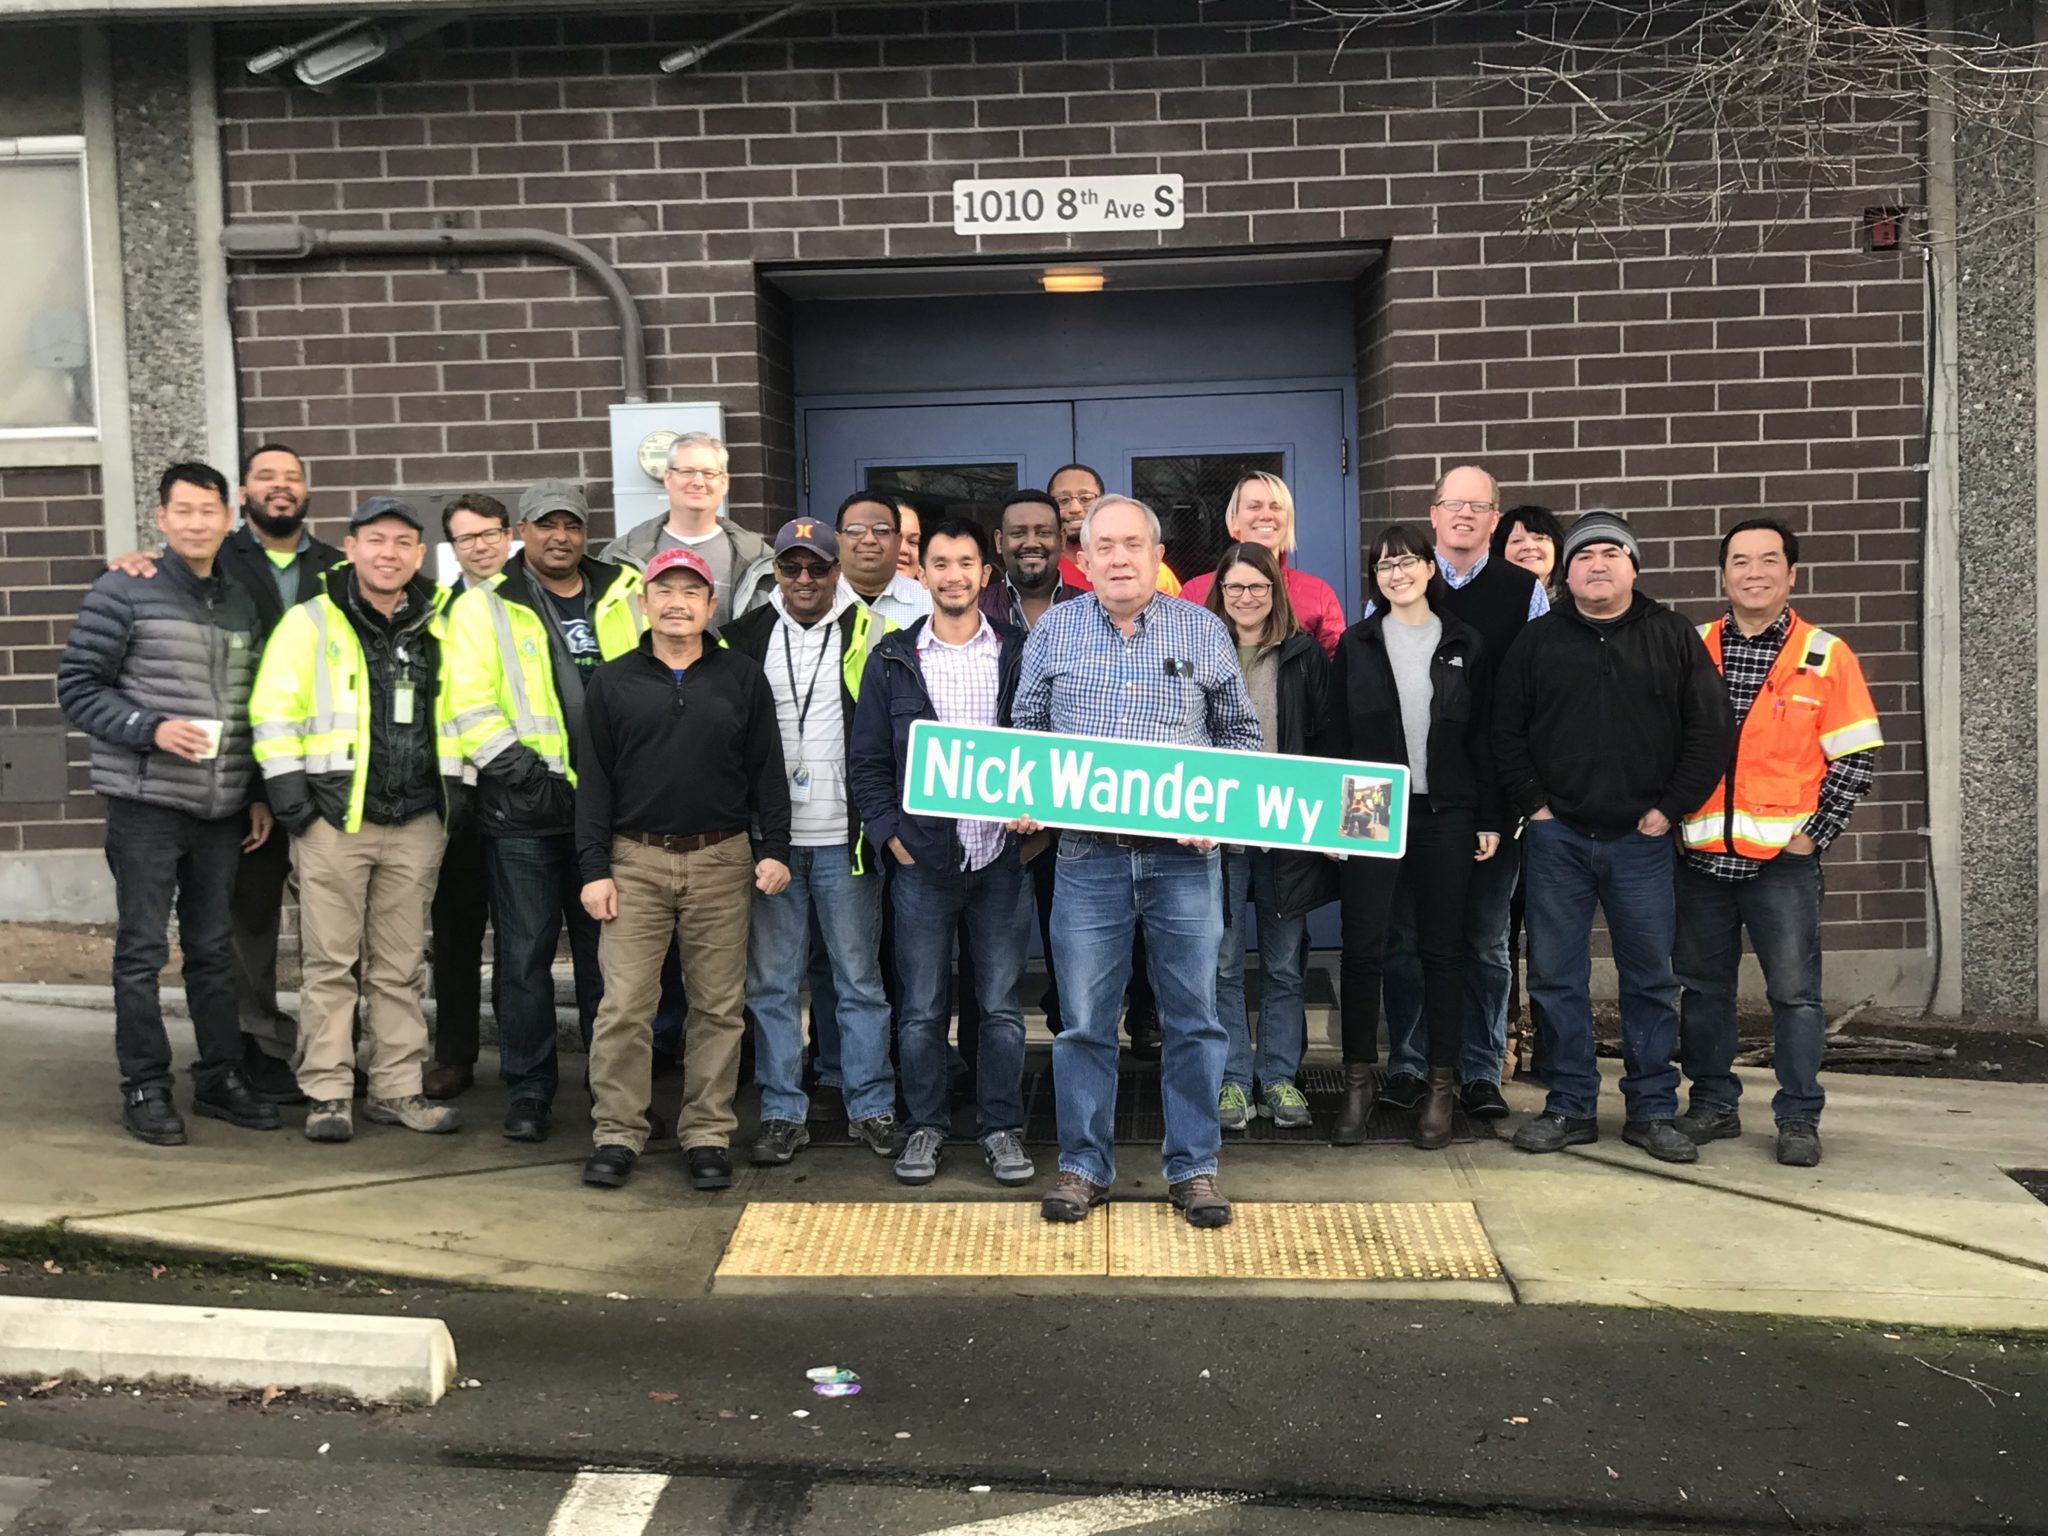 SDOT’s Curbside Management team gathers to celebrate Nick Wander’s retirement (pre-pandemic). Fred is visible to the left of Nick (behind the commemorative street sign).